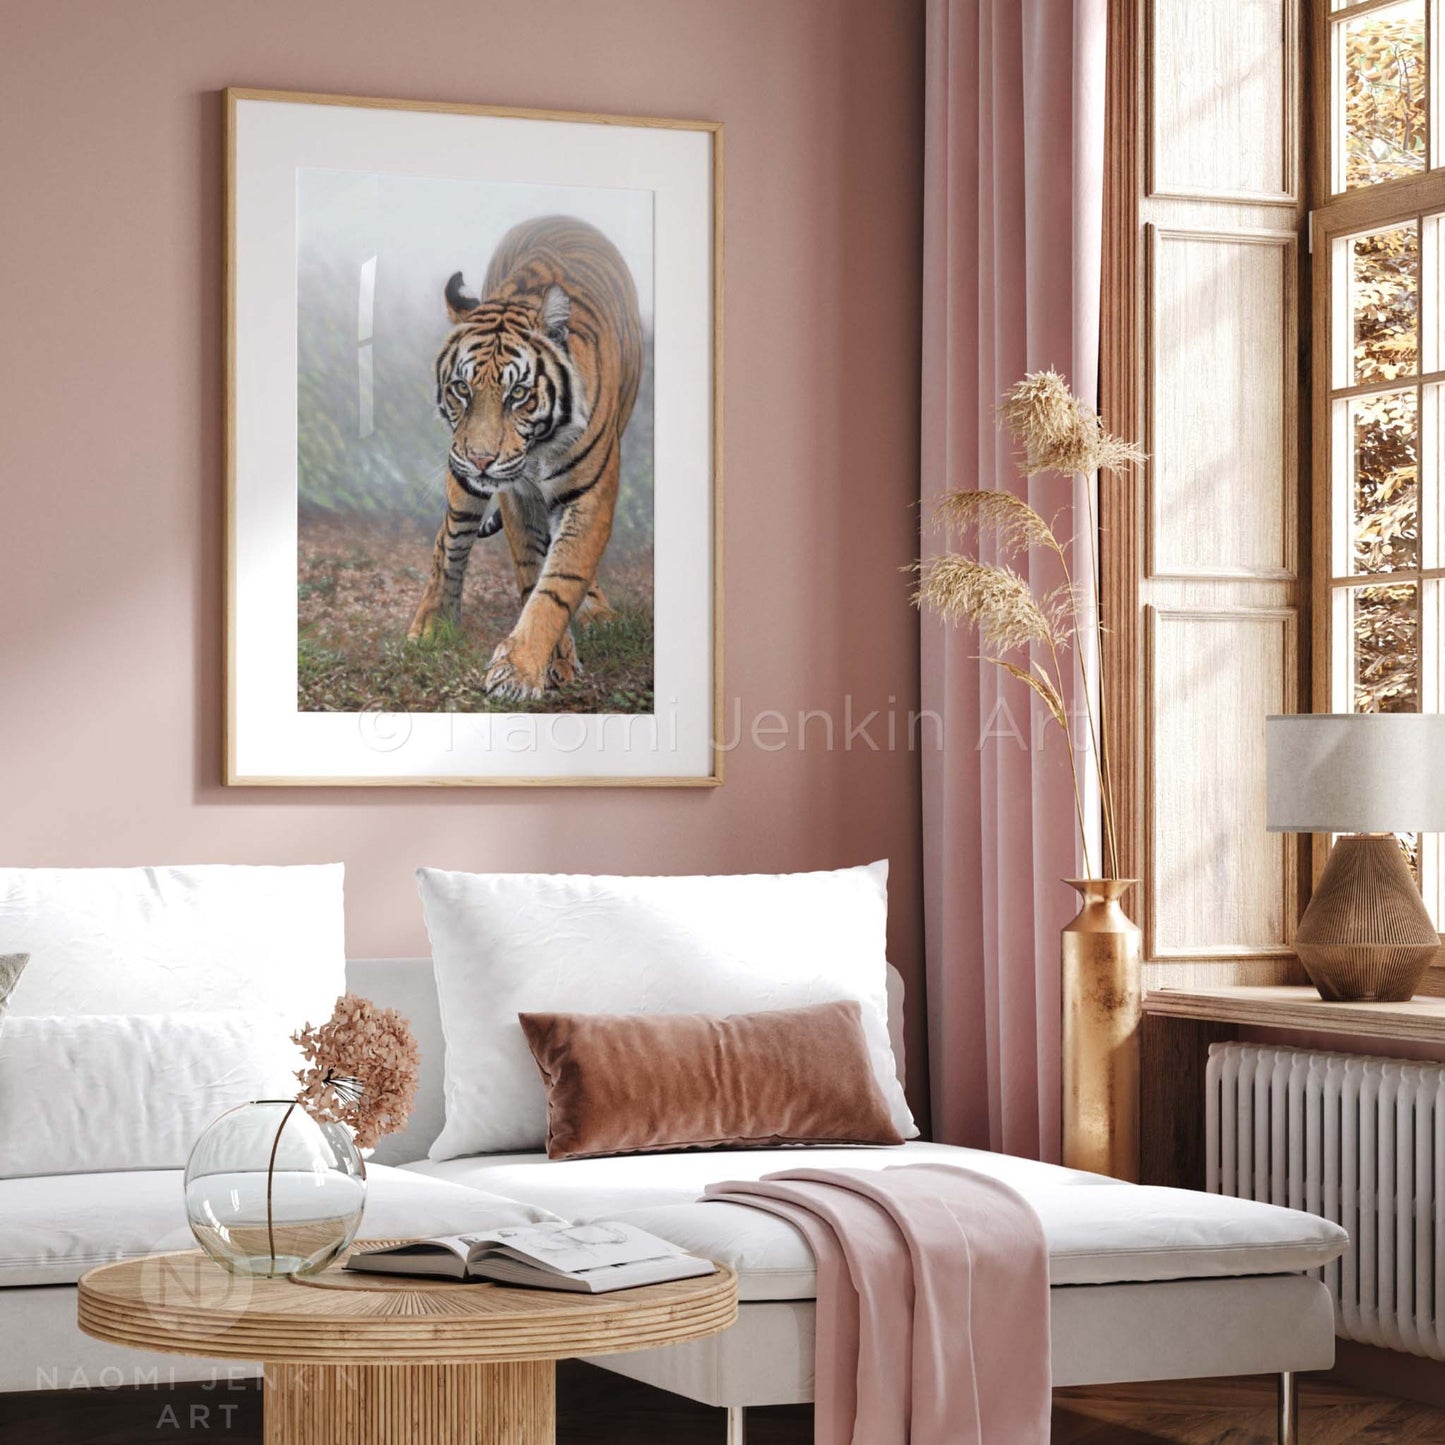 Framed tiger painting "Stealth" in a living room setting by wildlife artist Naomi Jenkin Art